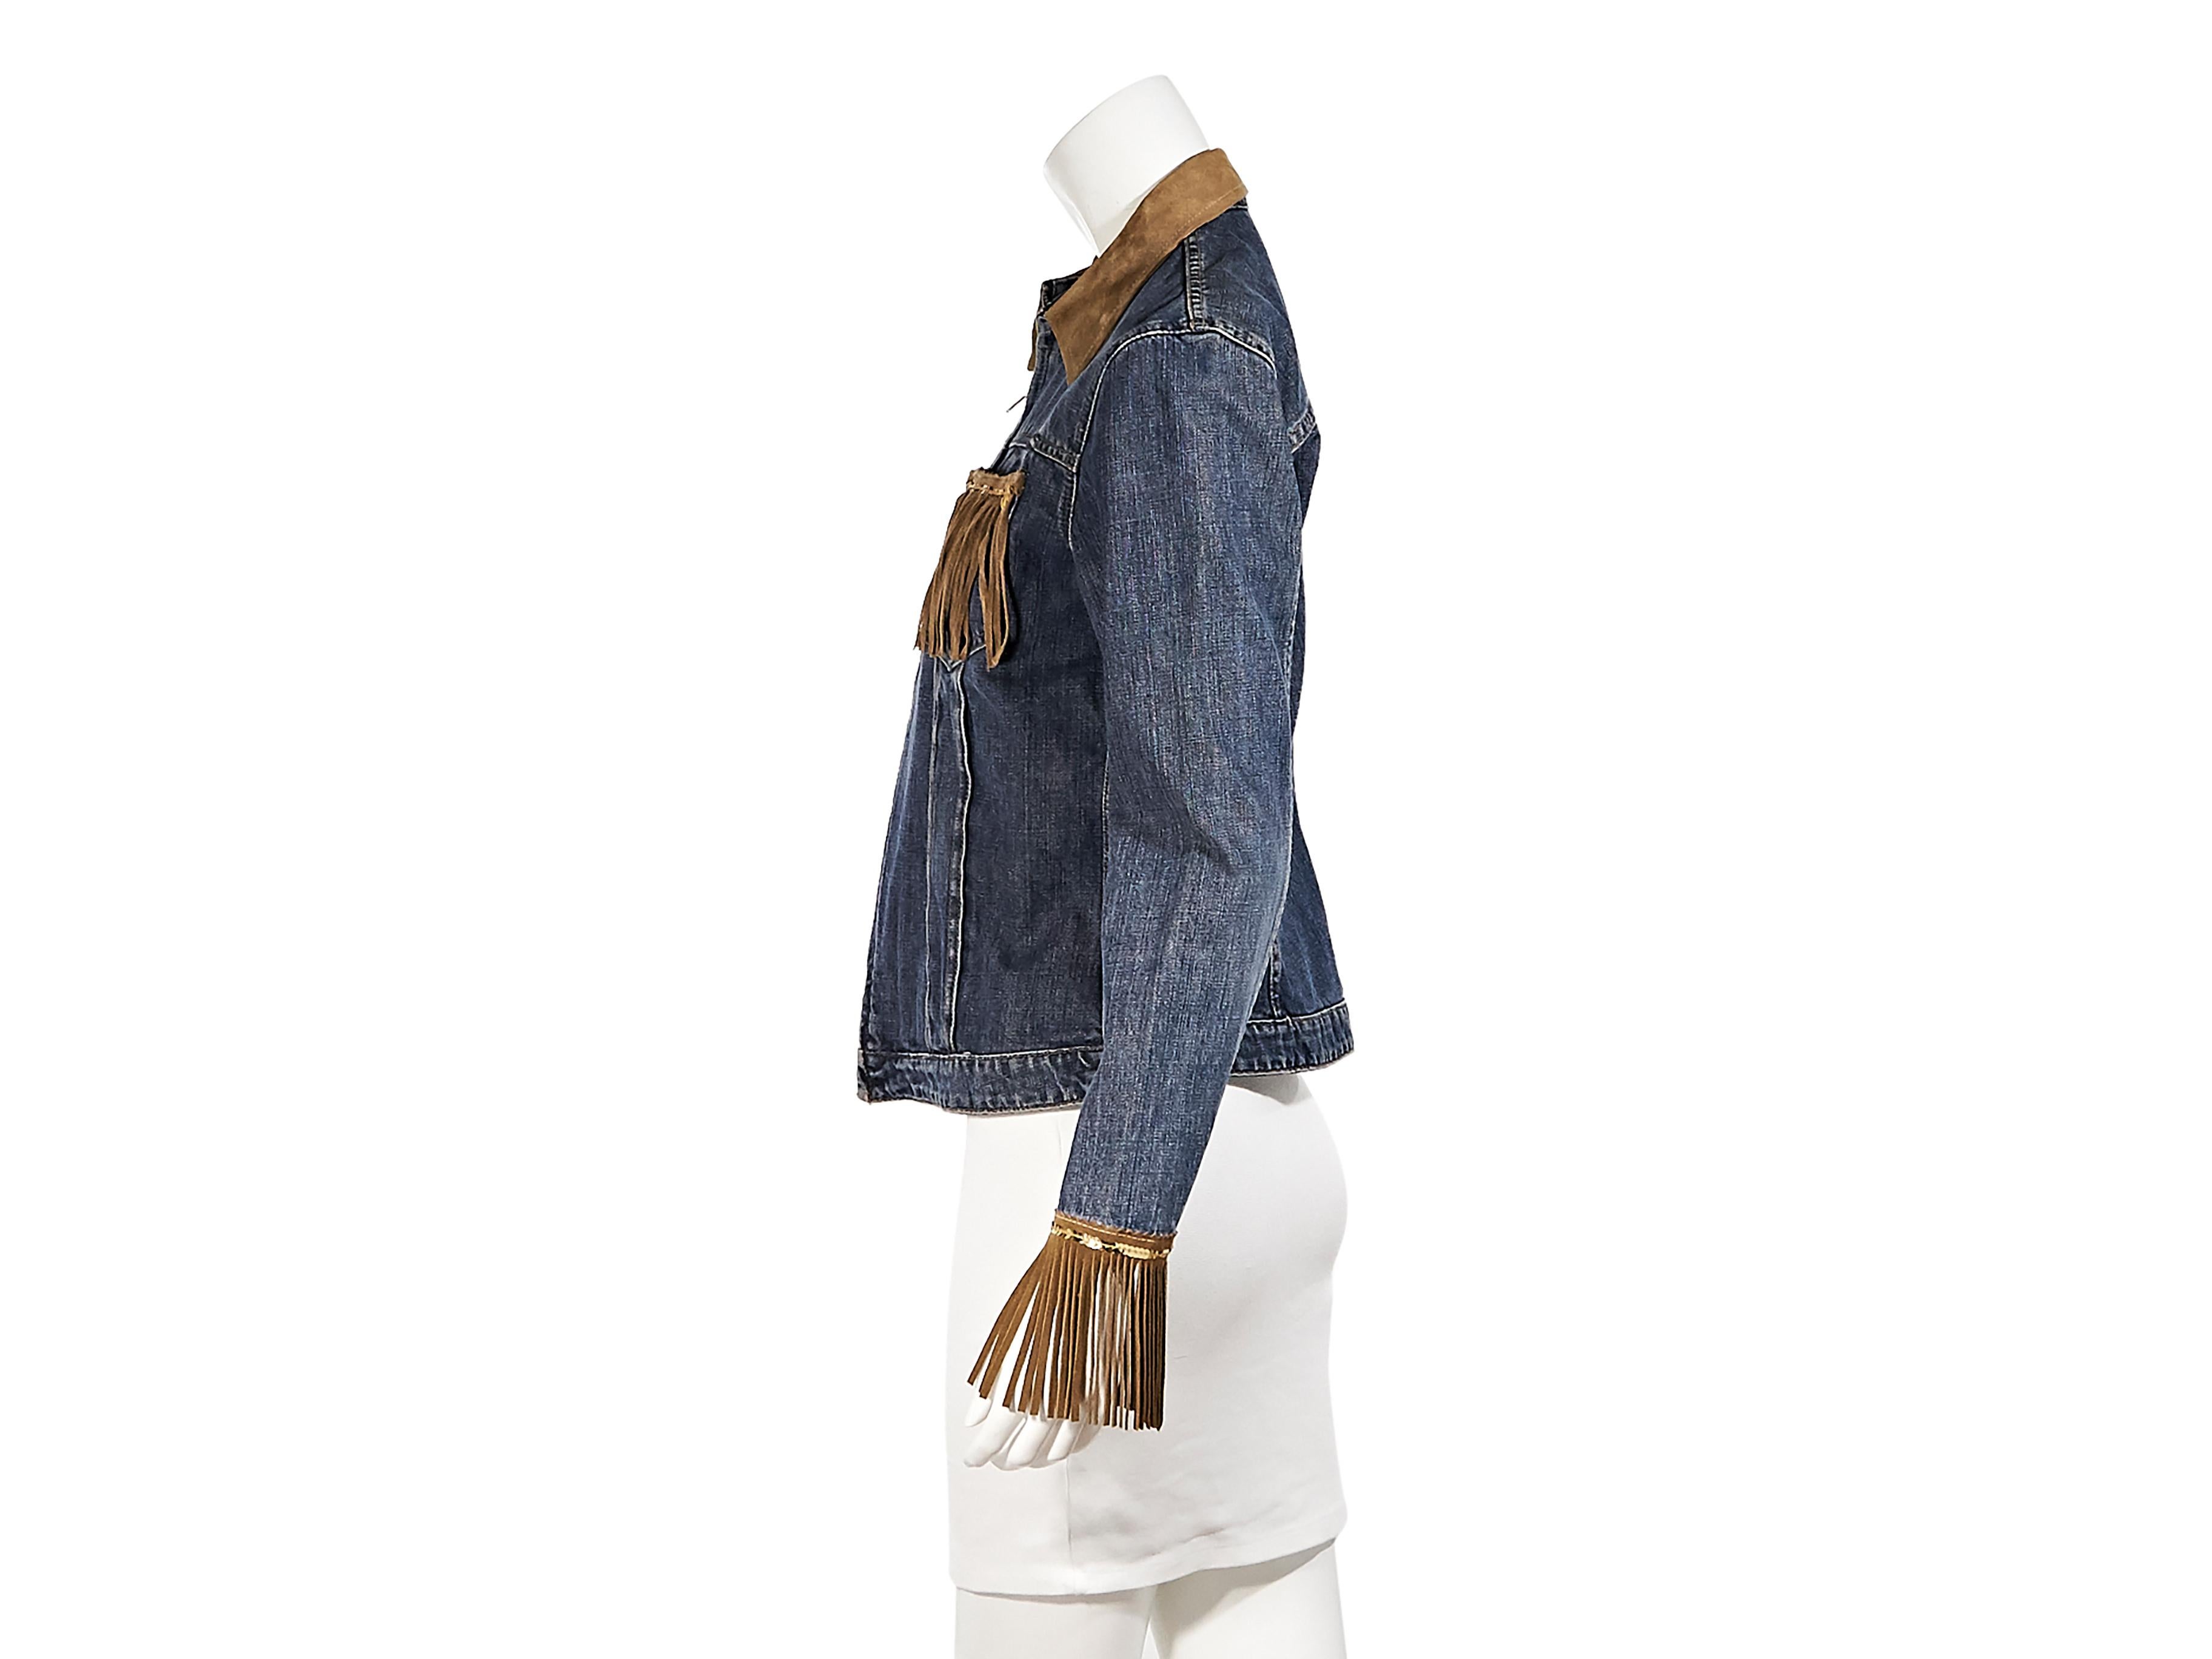 Product details:  Blue western jean jacket by D&G.  Circa the 2000s.  Spread collar.  Long sleeves.  Fringe cuffs.  Zip-front closure.  Chest patch pockets accented with suede fringe and sequins.  32